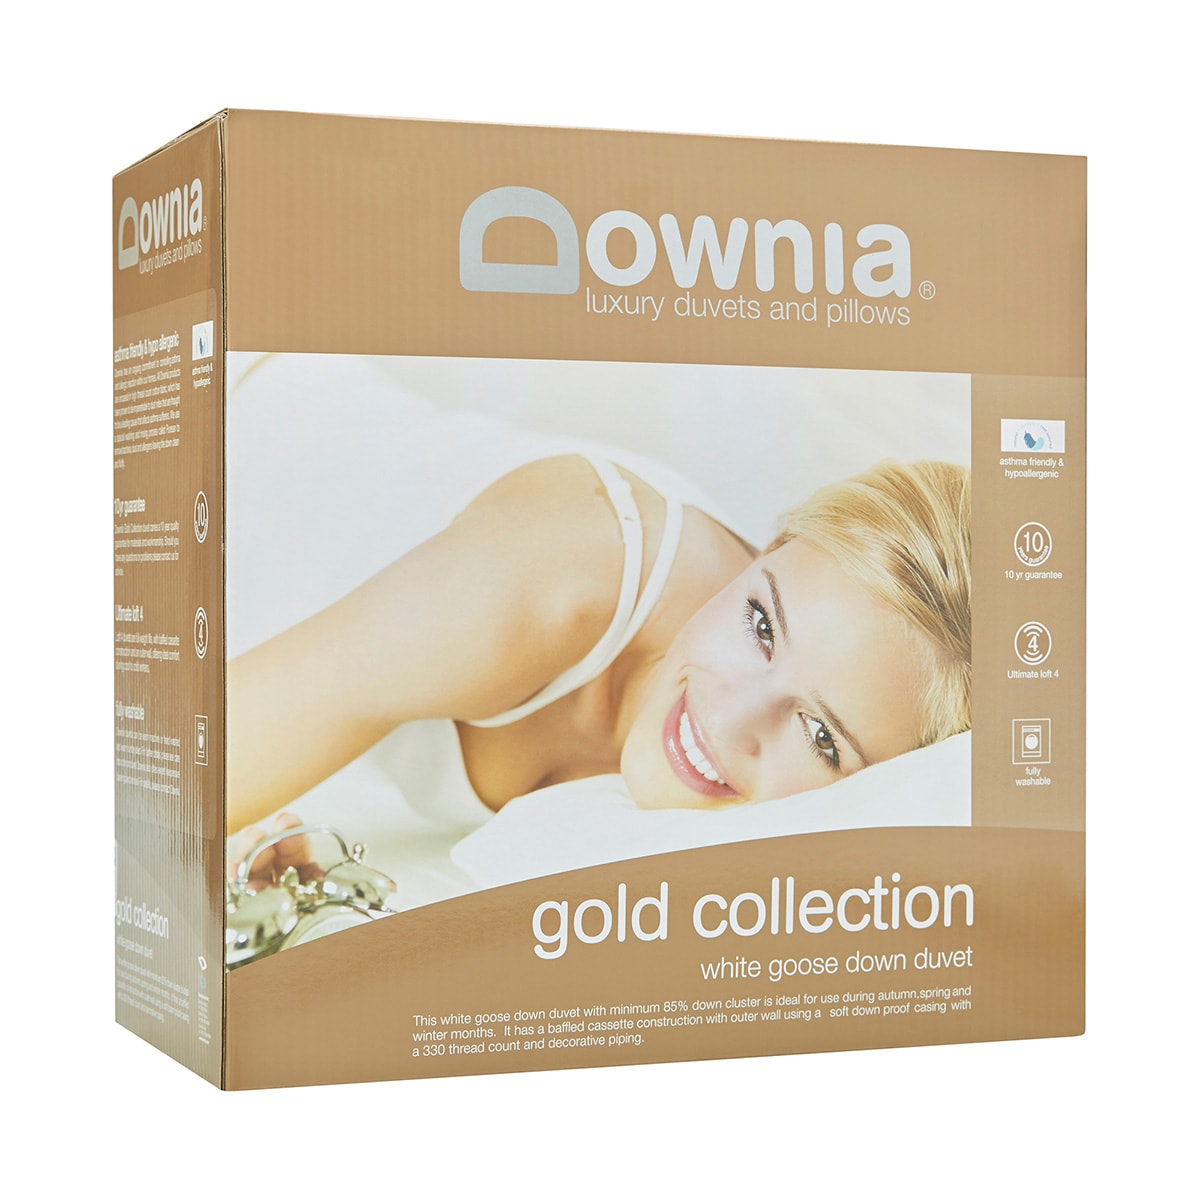 GOLD COLLECTION white goose down duvet 